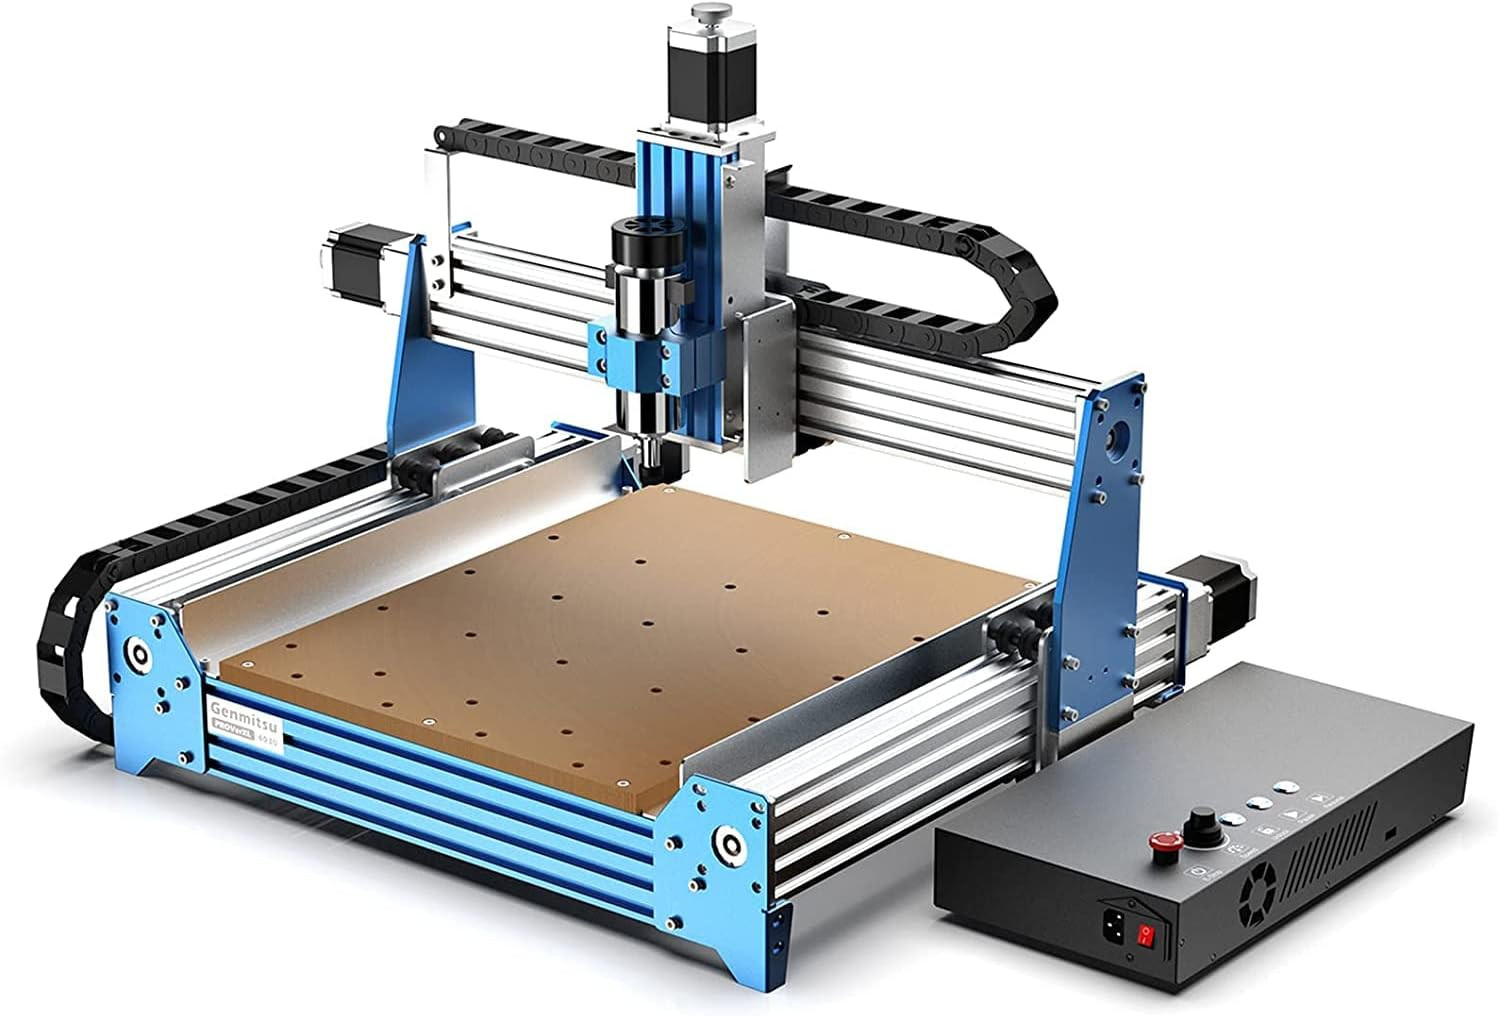 Genmitsu CNC Router Machine PROVerXL 4030 AU for Wood Metal Acrylic MDF Carving Arts Crafts DIY Design, 3 Axis Milling Cutting Engraving Machine